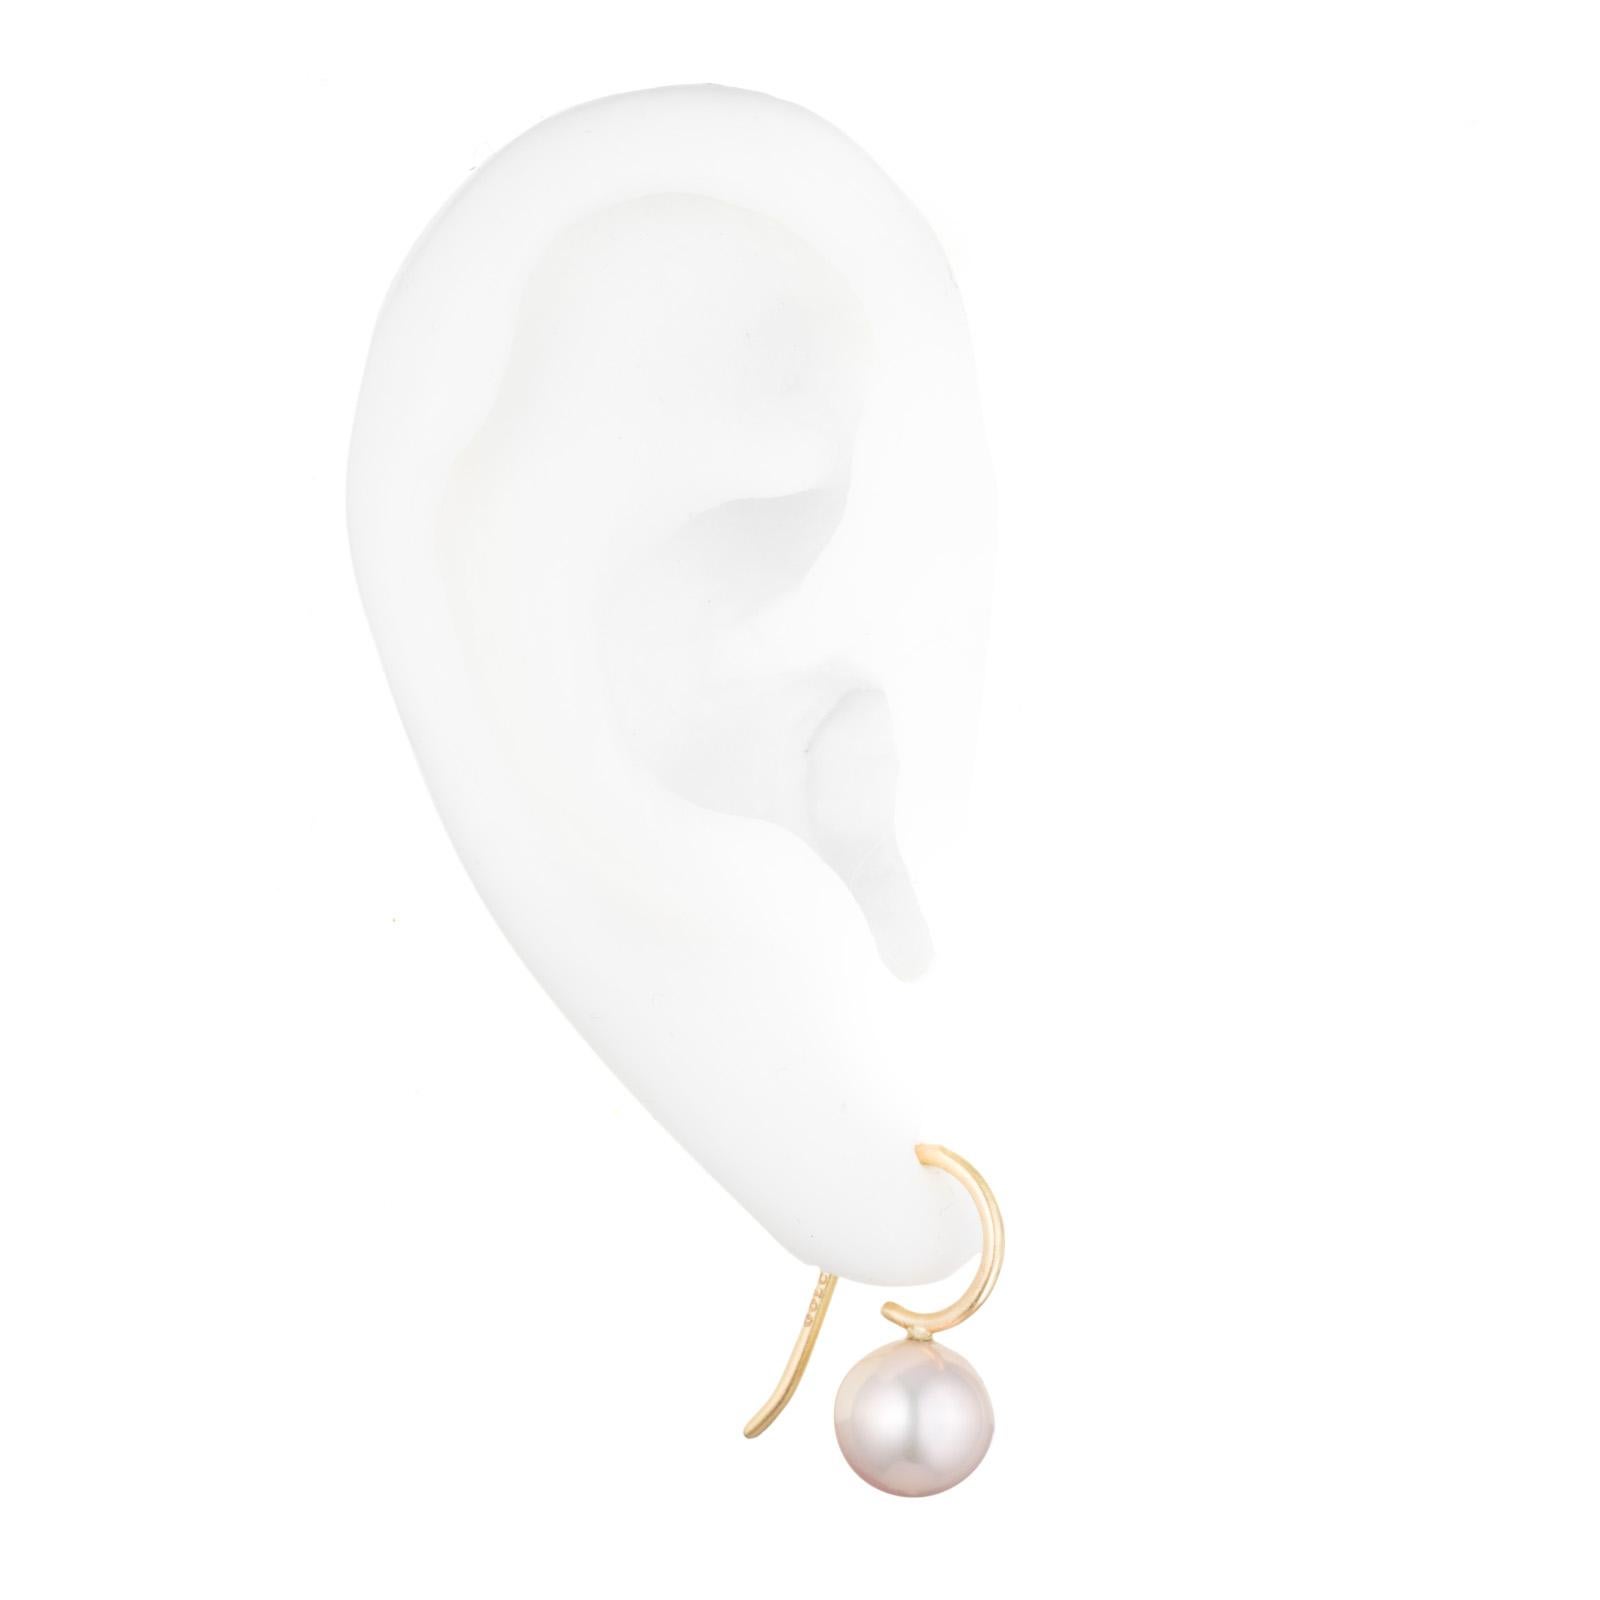 Our signature earrings with round pale pinkish peach round freshwater cultured pearls suspended from 18K gold ear wires. Everyone looks good in these and we use pastel peach & pink colored pearls because they warm up the complexion. Think blush, but